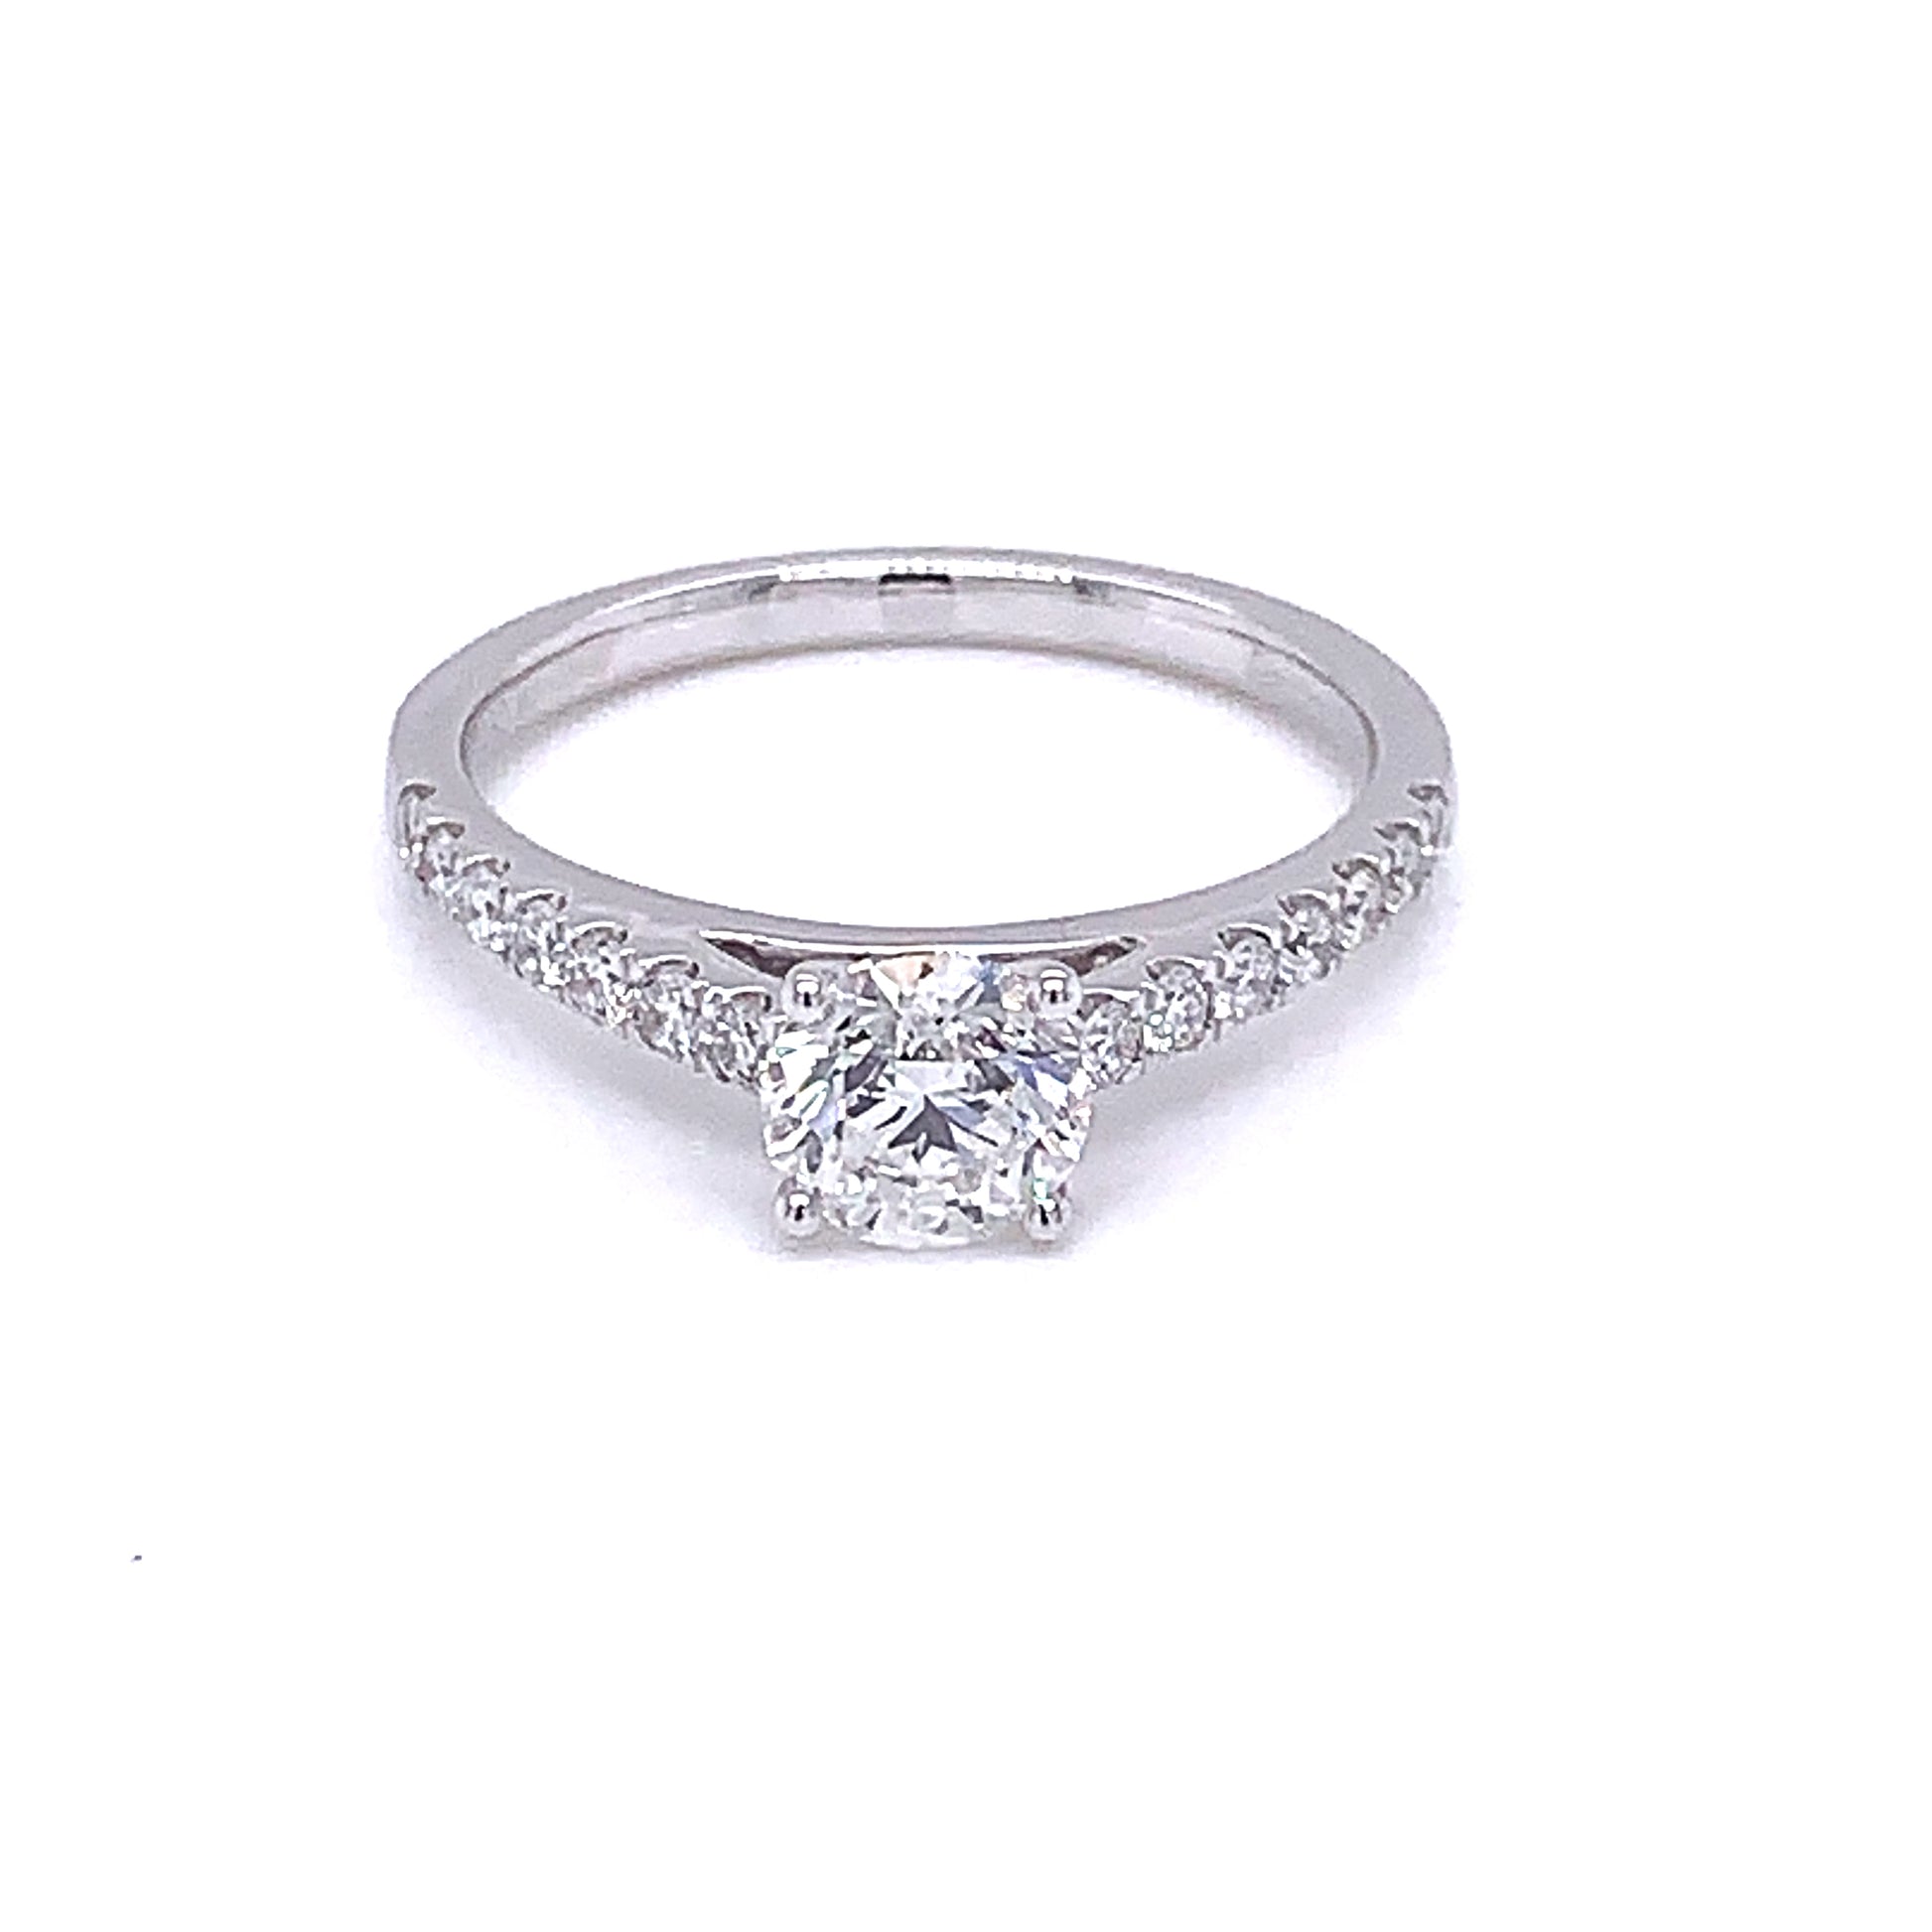 Round Brilliant Cut Diamond Solitaire with Diamond set Shoulders - 0.96cts  gardiner-brothers   